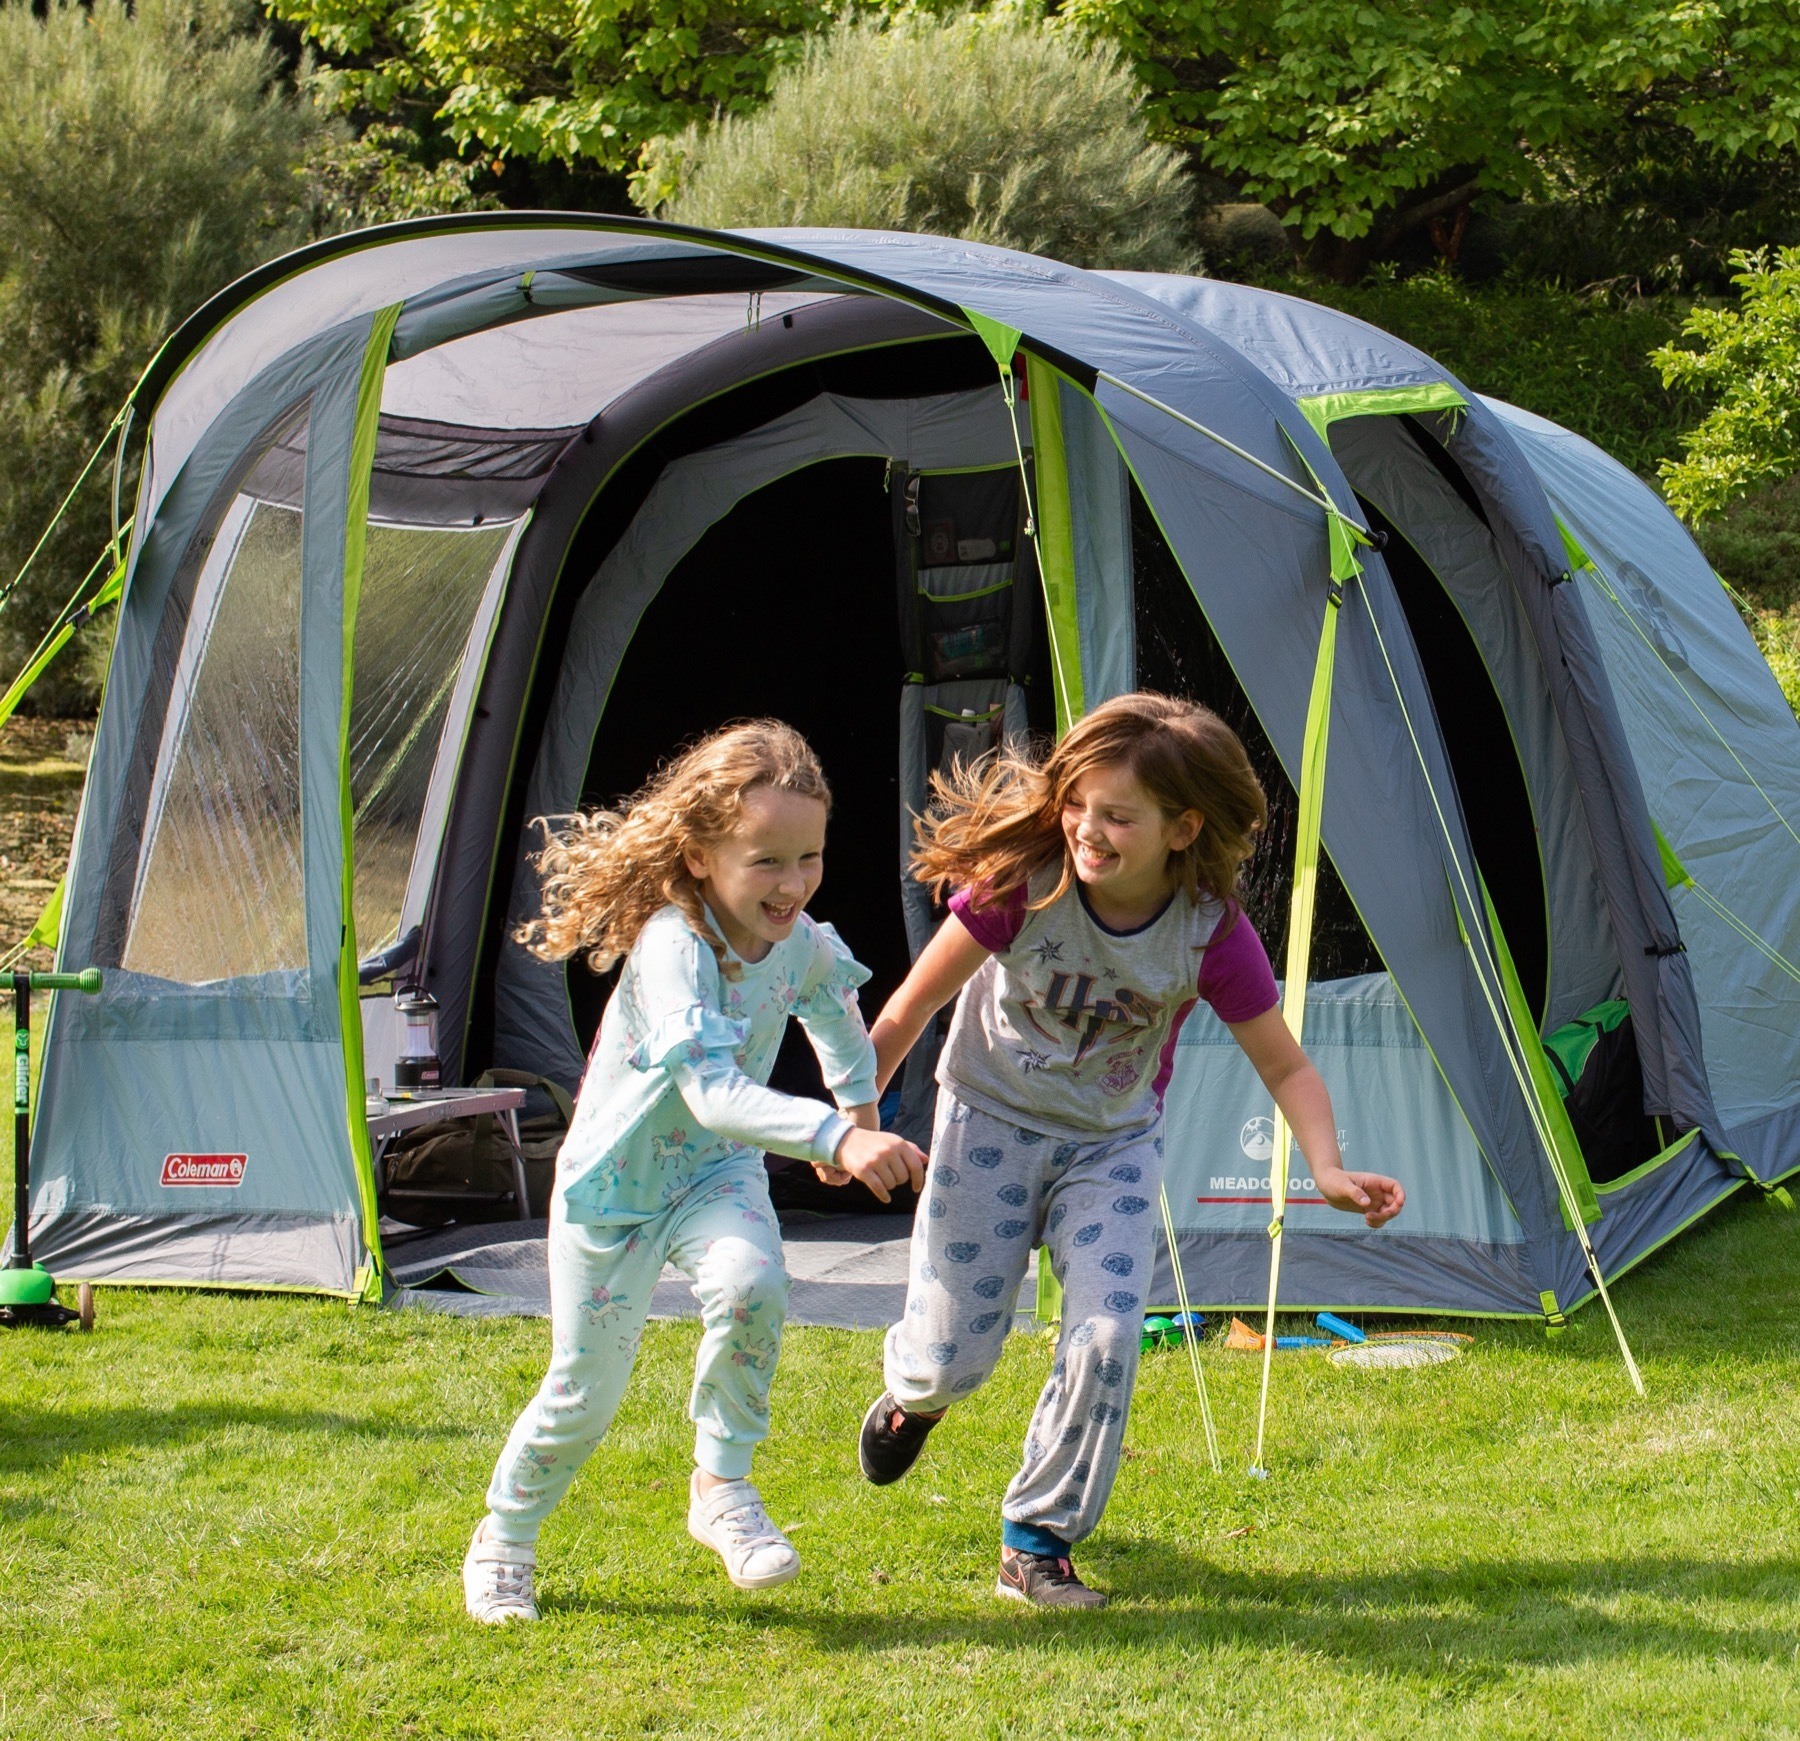 Meadowood 4 Air family tent